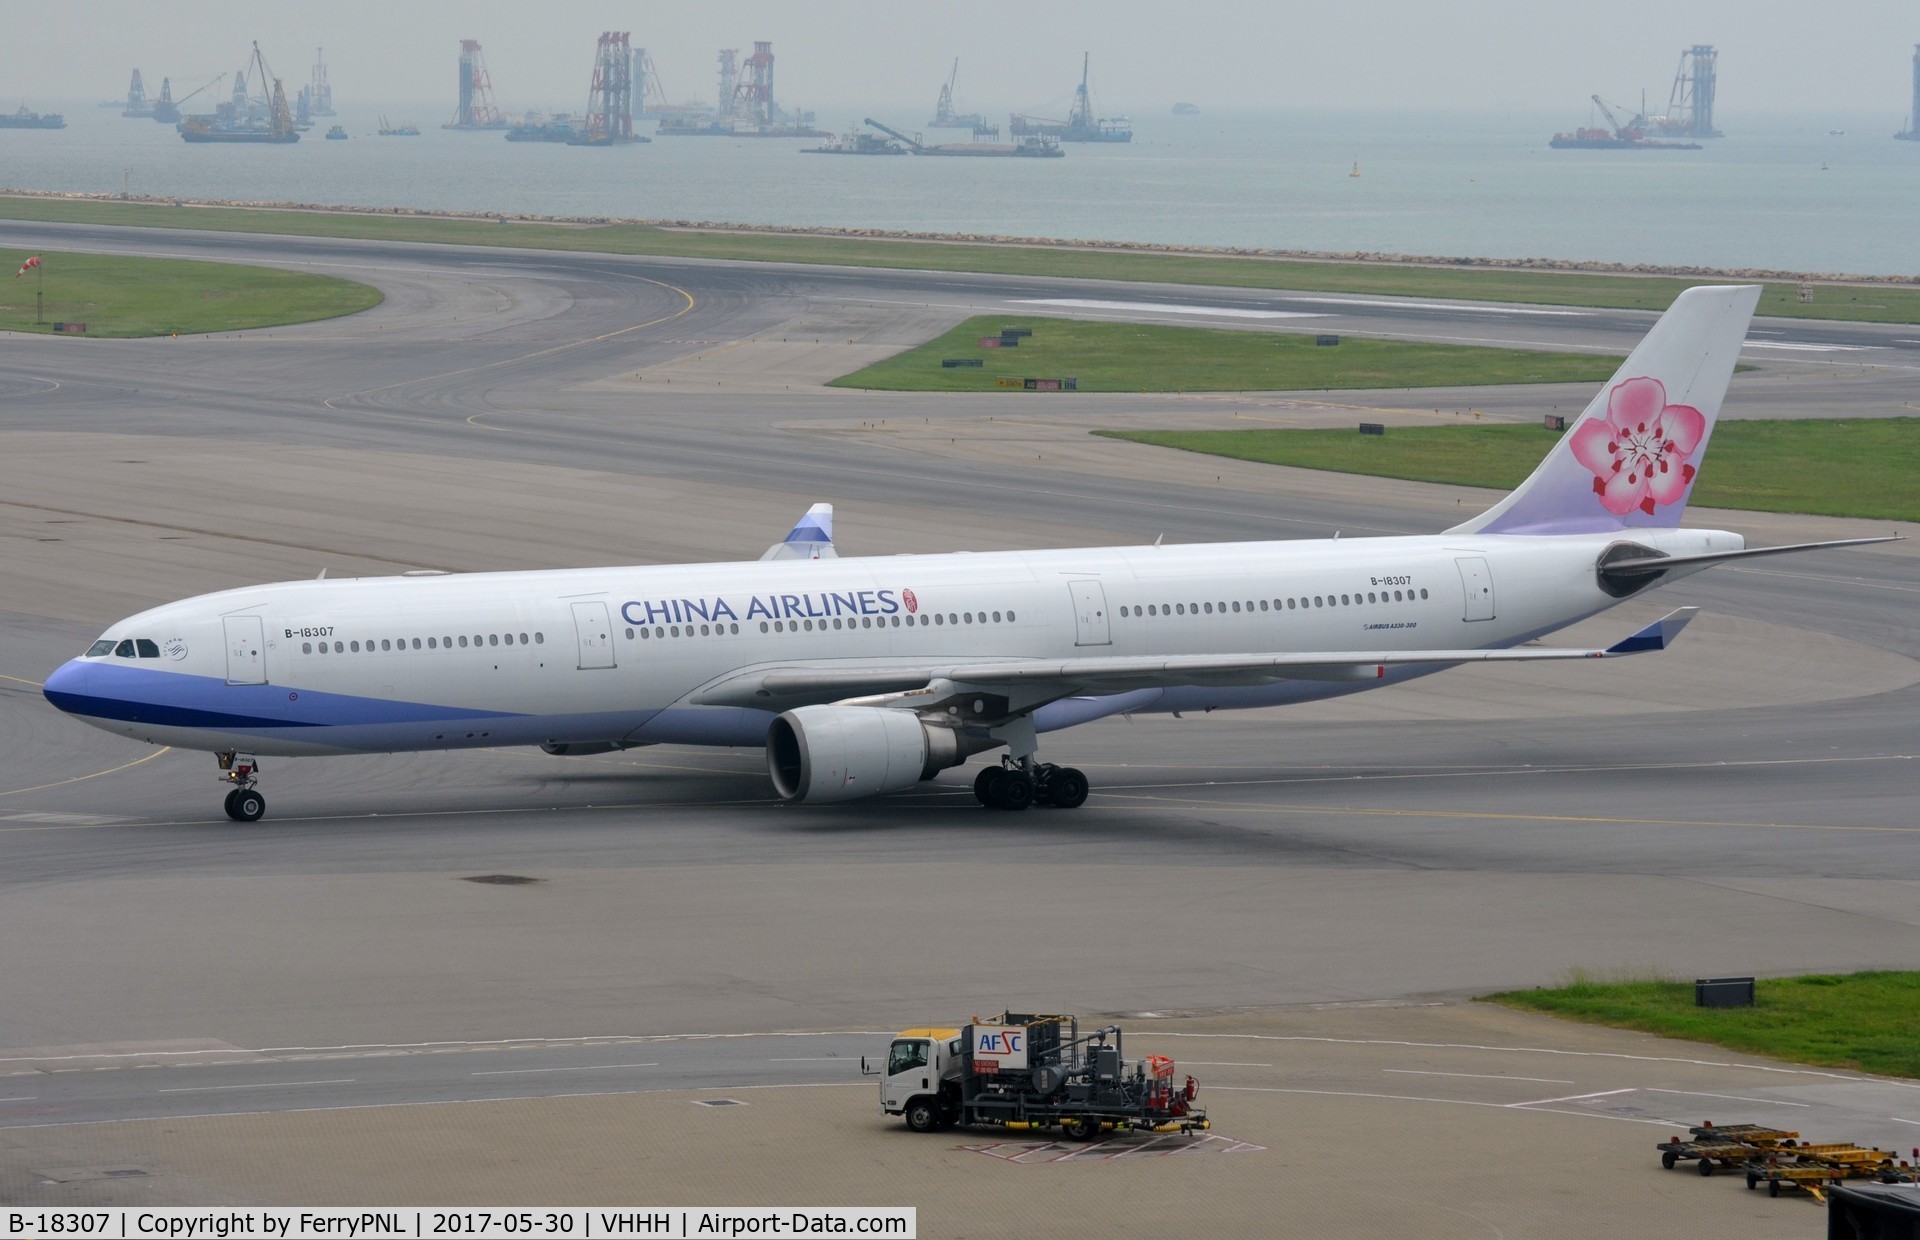 B-18307, 2005 Airbus A330-302 C/N 691, China Airlines A333 in HKG